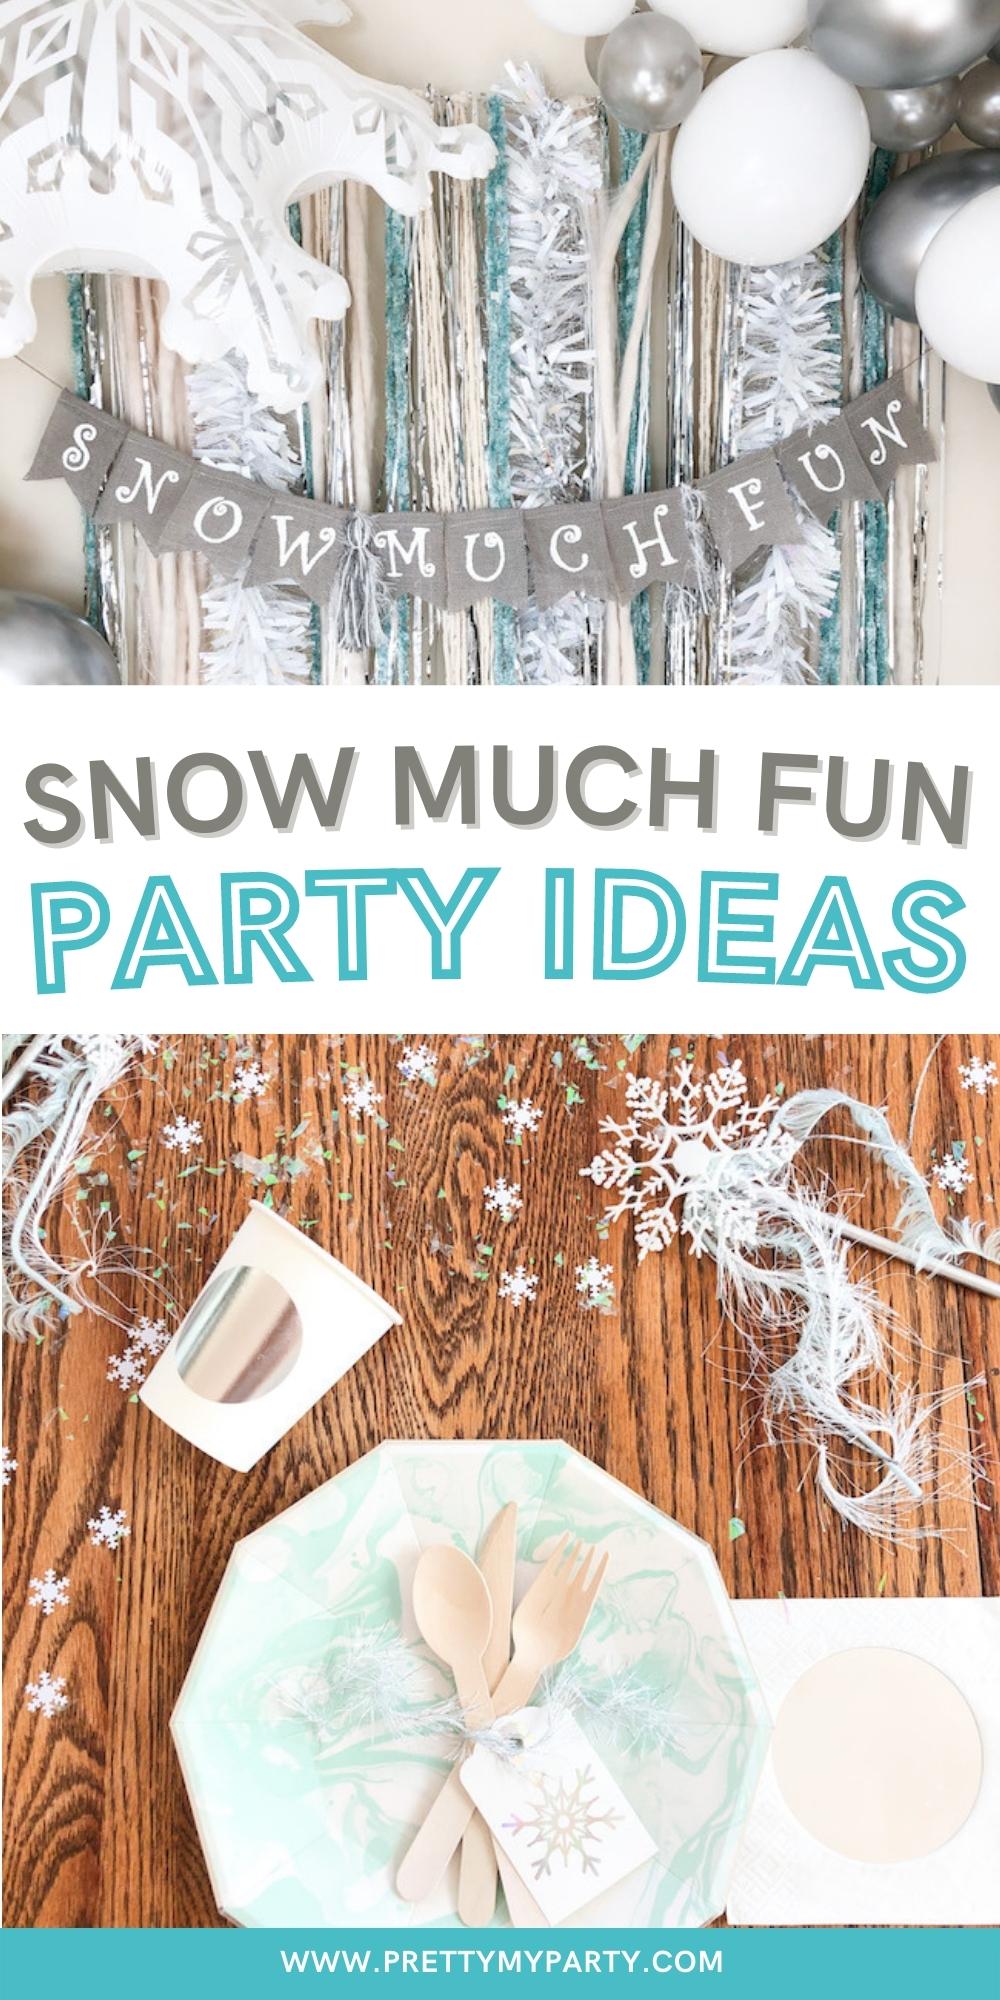 Snow Much Fun Winter Party on Pretty My Party